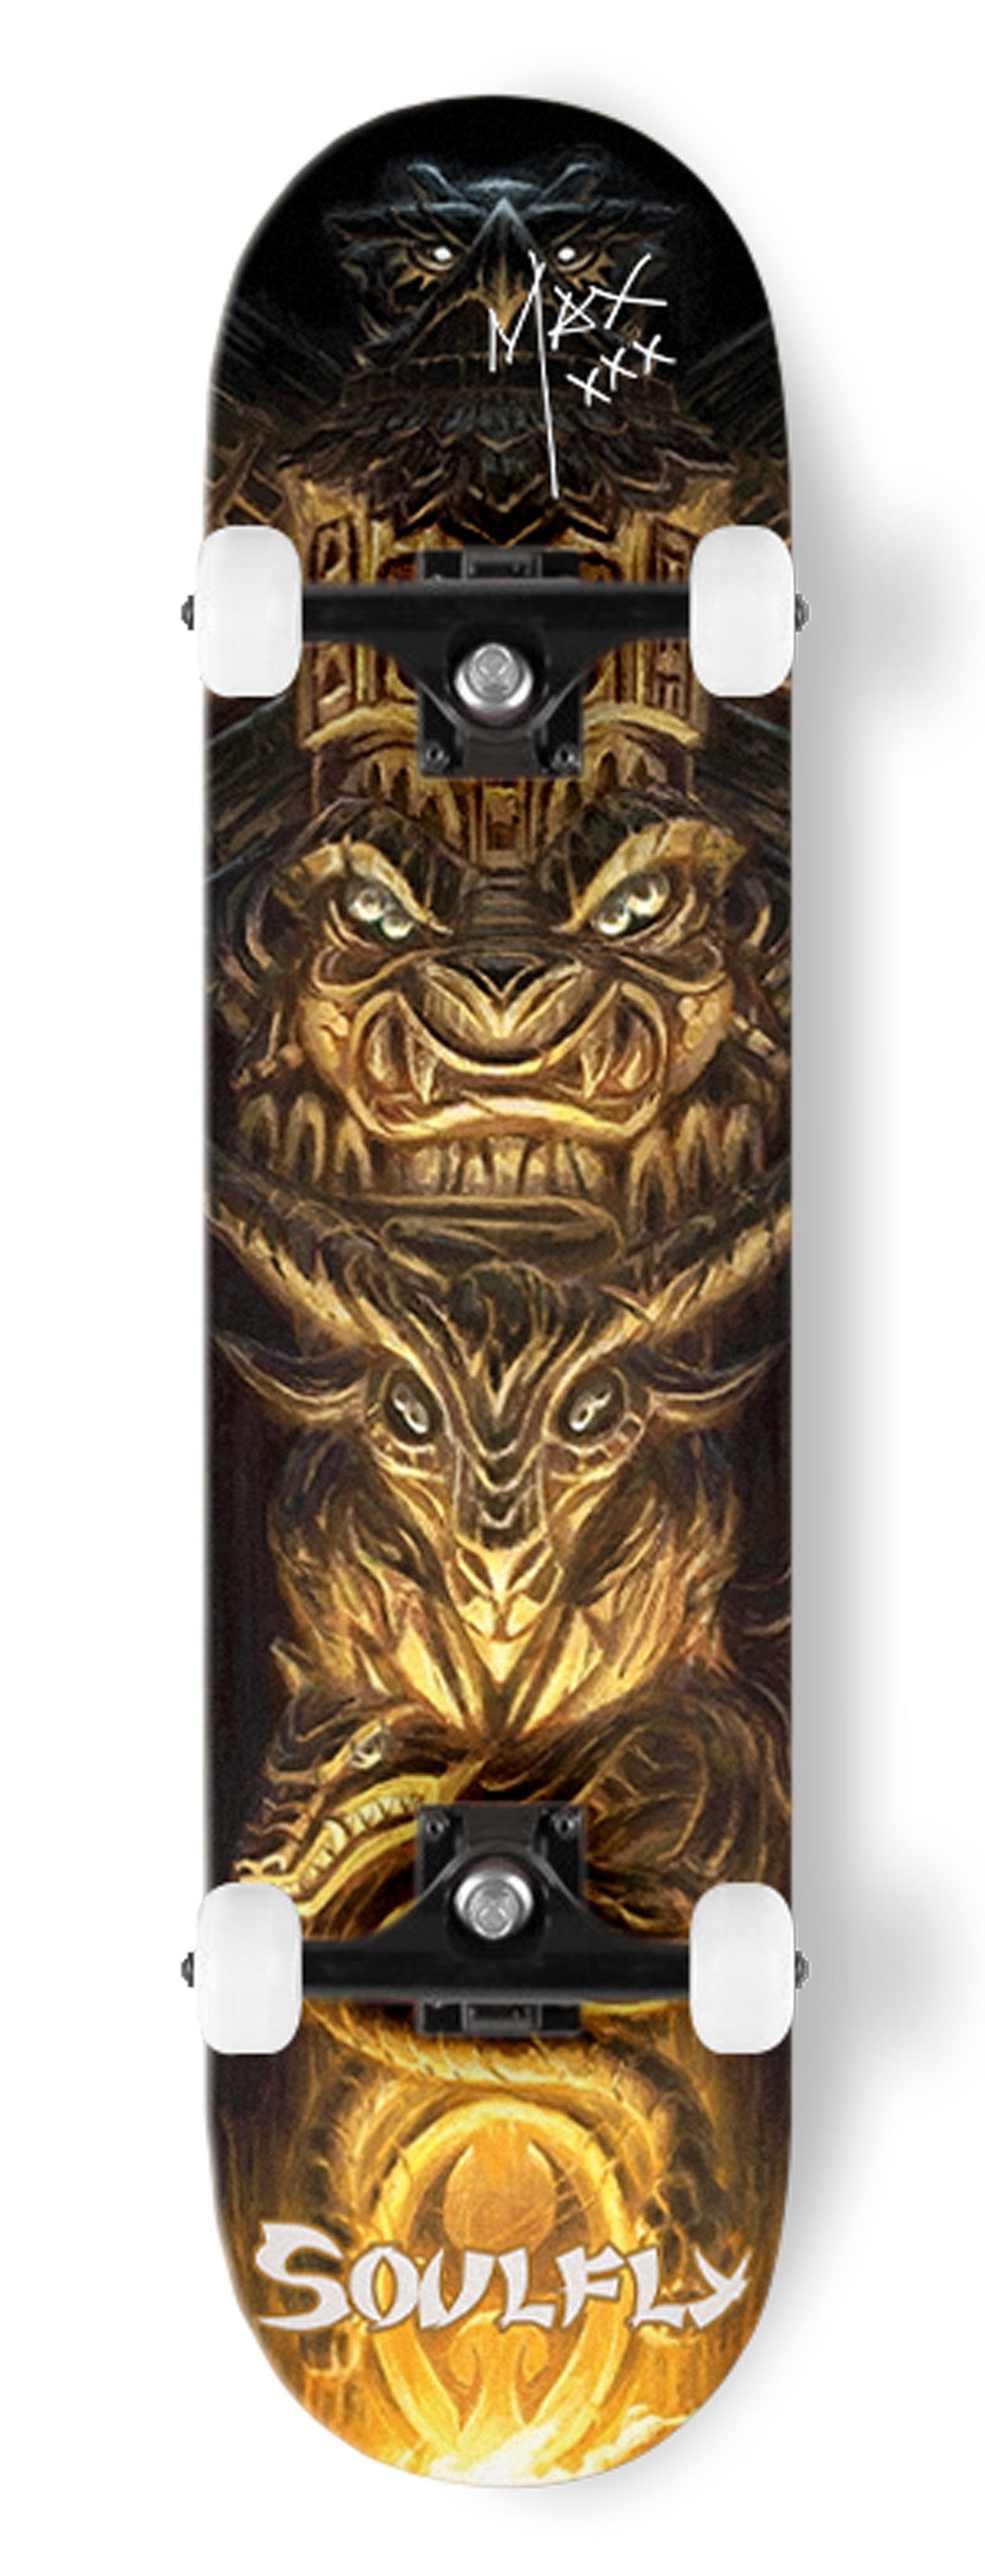 *PRE ORDER Soulfly Skateboard Deck (Signed by Max Cavalera) - Ships December 10th